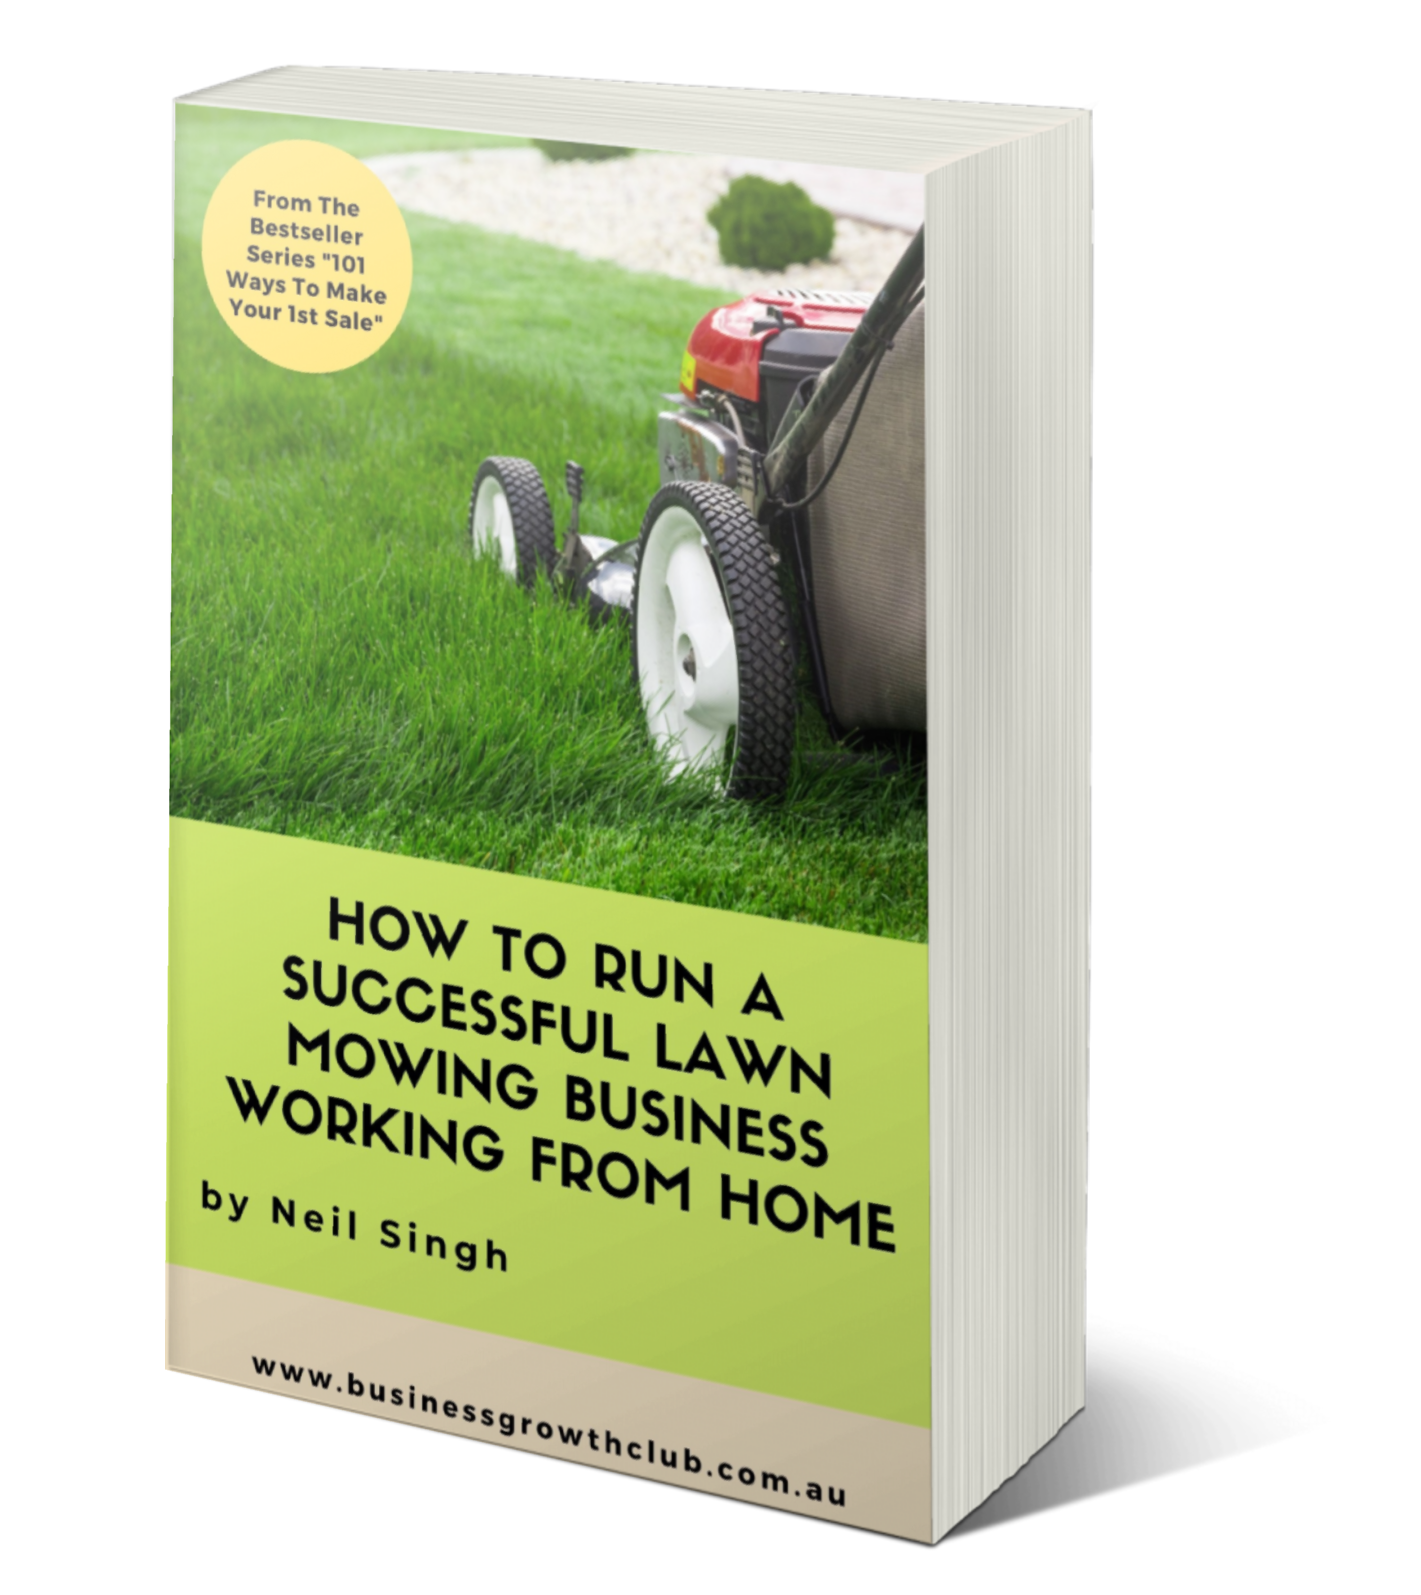 Free eBook How To Start a Successful Lawn Mowing Business